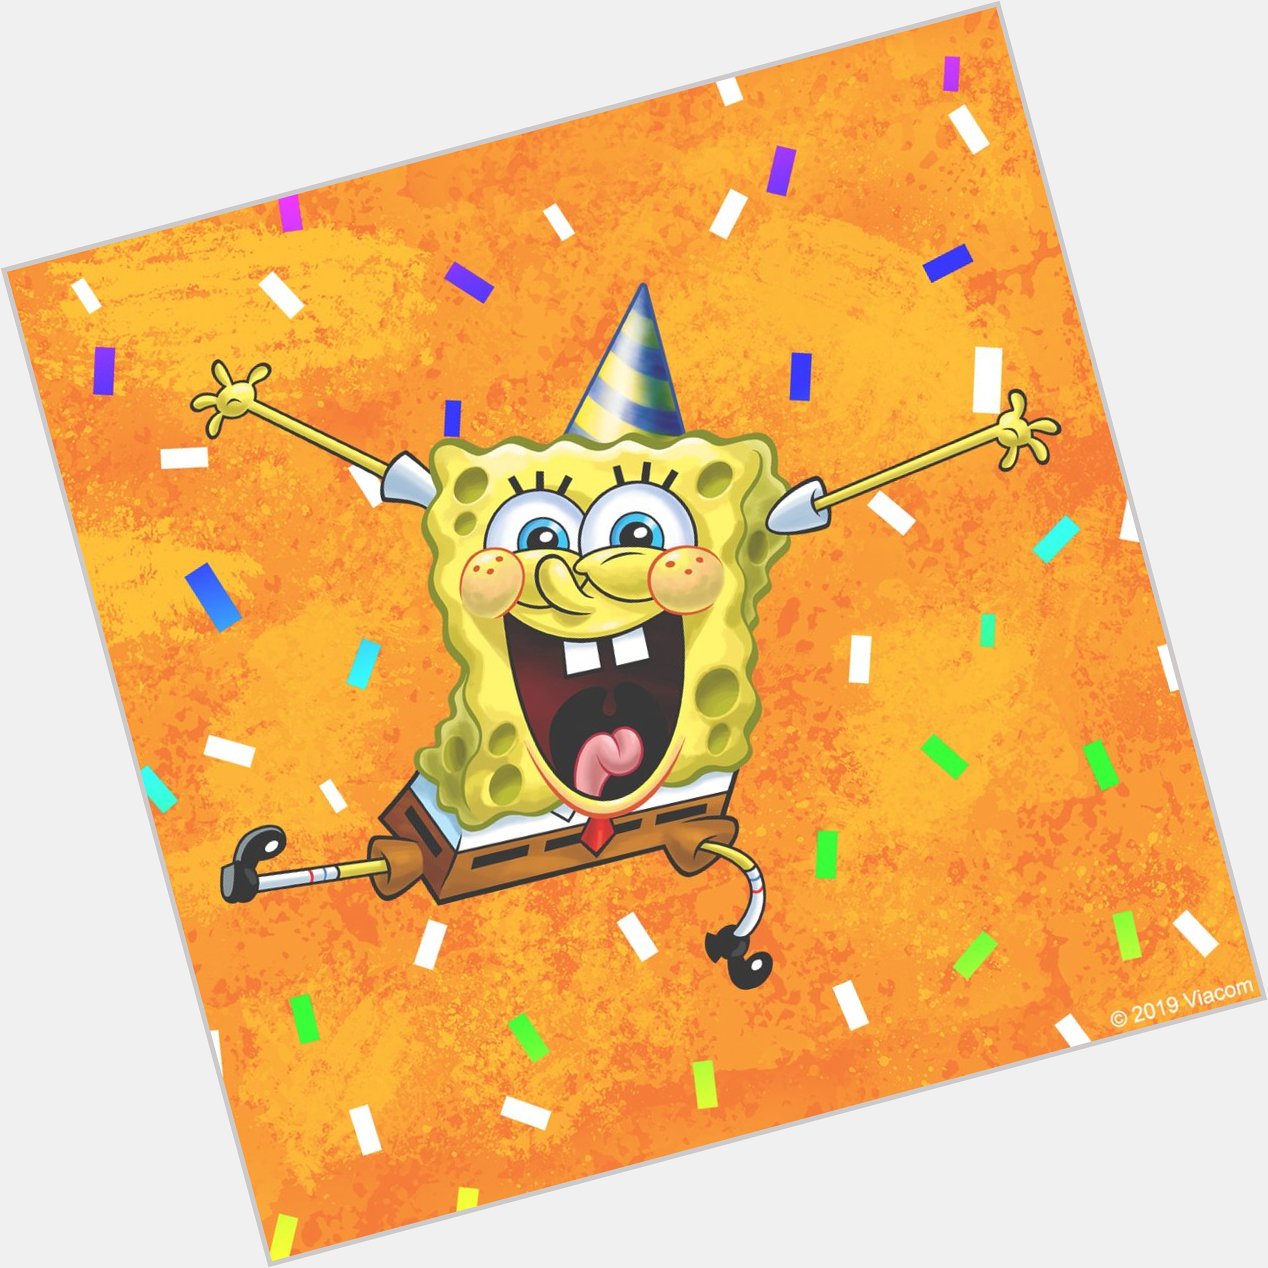 Happy birthday SquarePants! What is your favorite moment? 